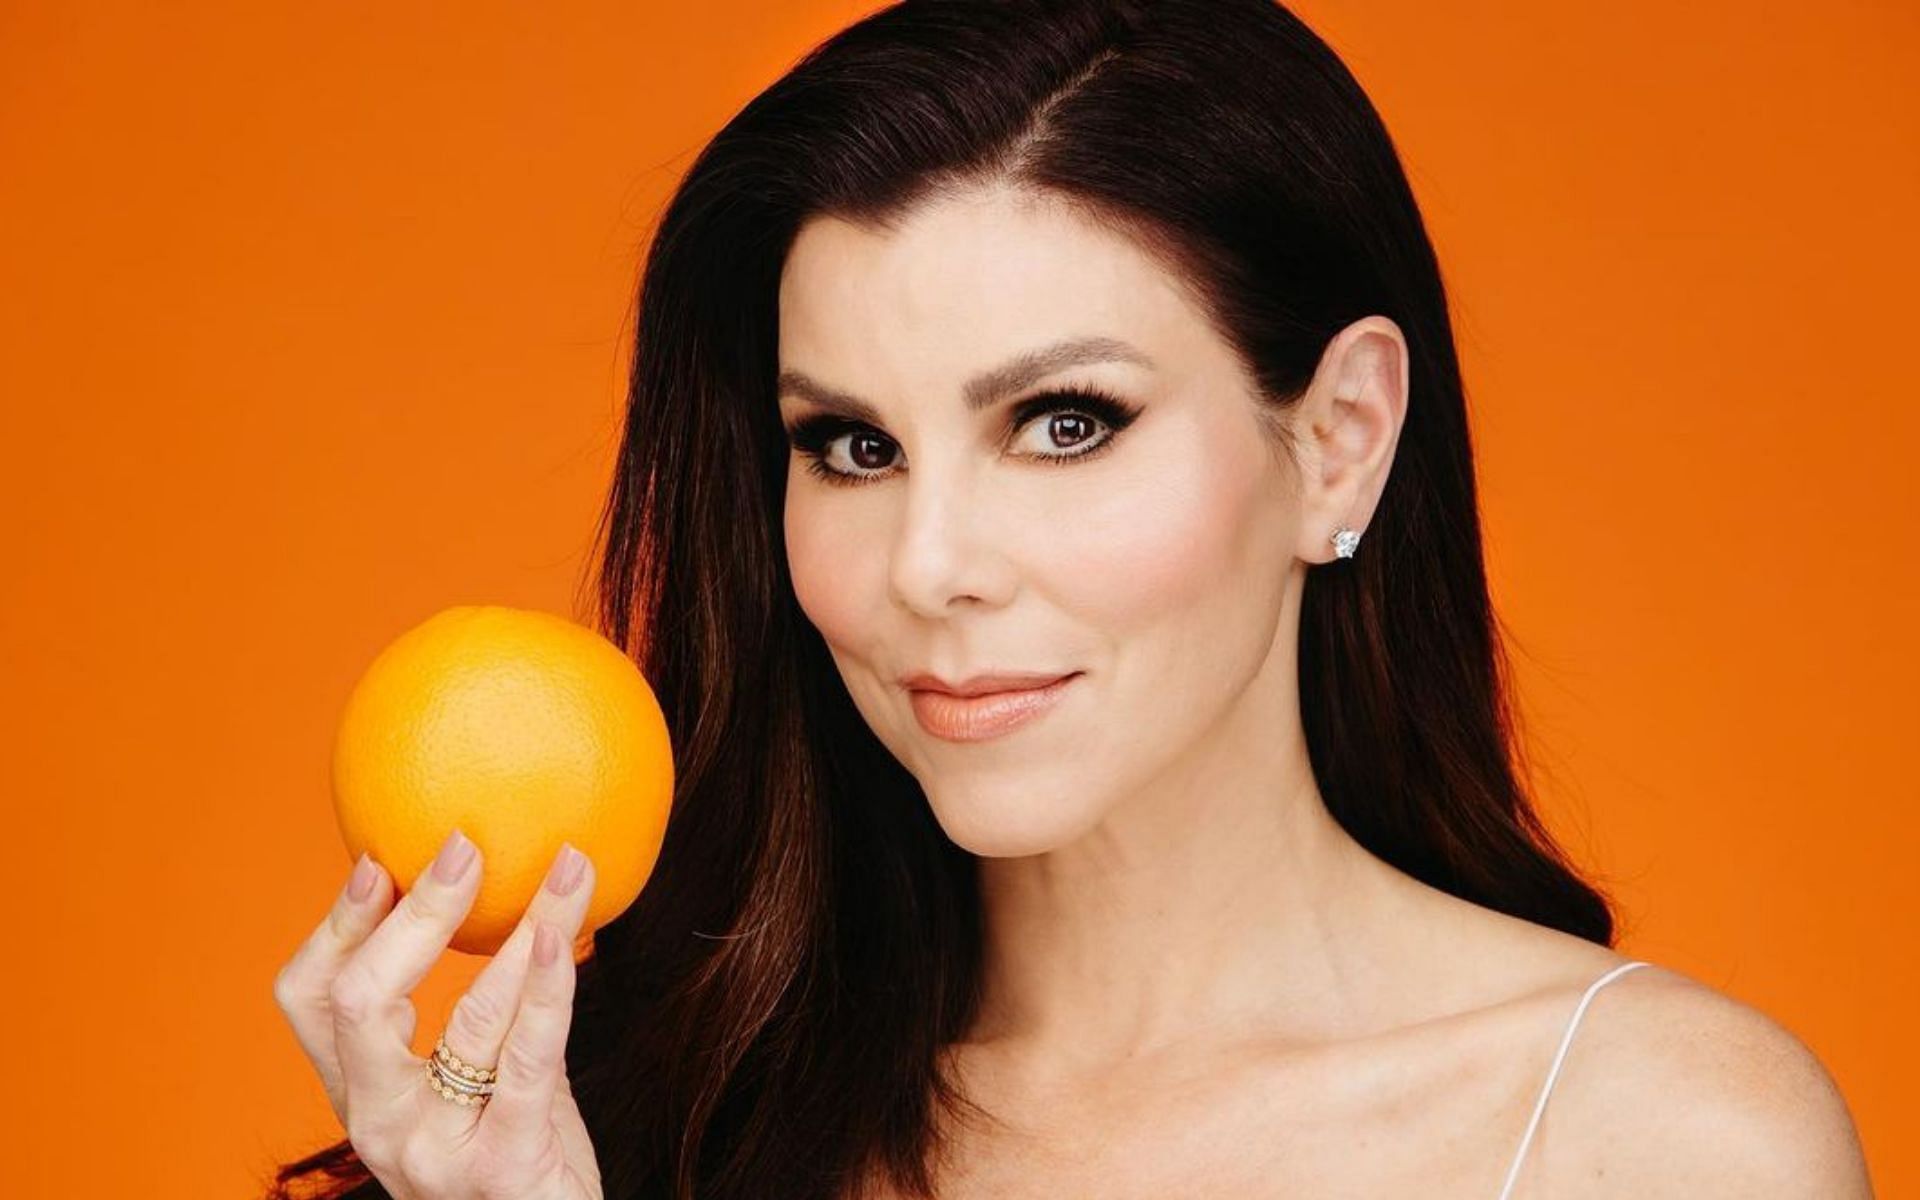 &#039;Real Housewives of Orange County&#039; star Heather Dubrow (Image via heatherdubrow/ Instagram)